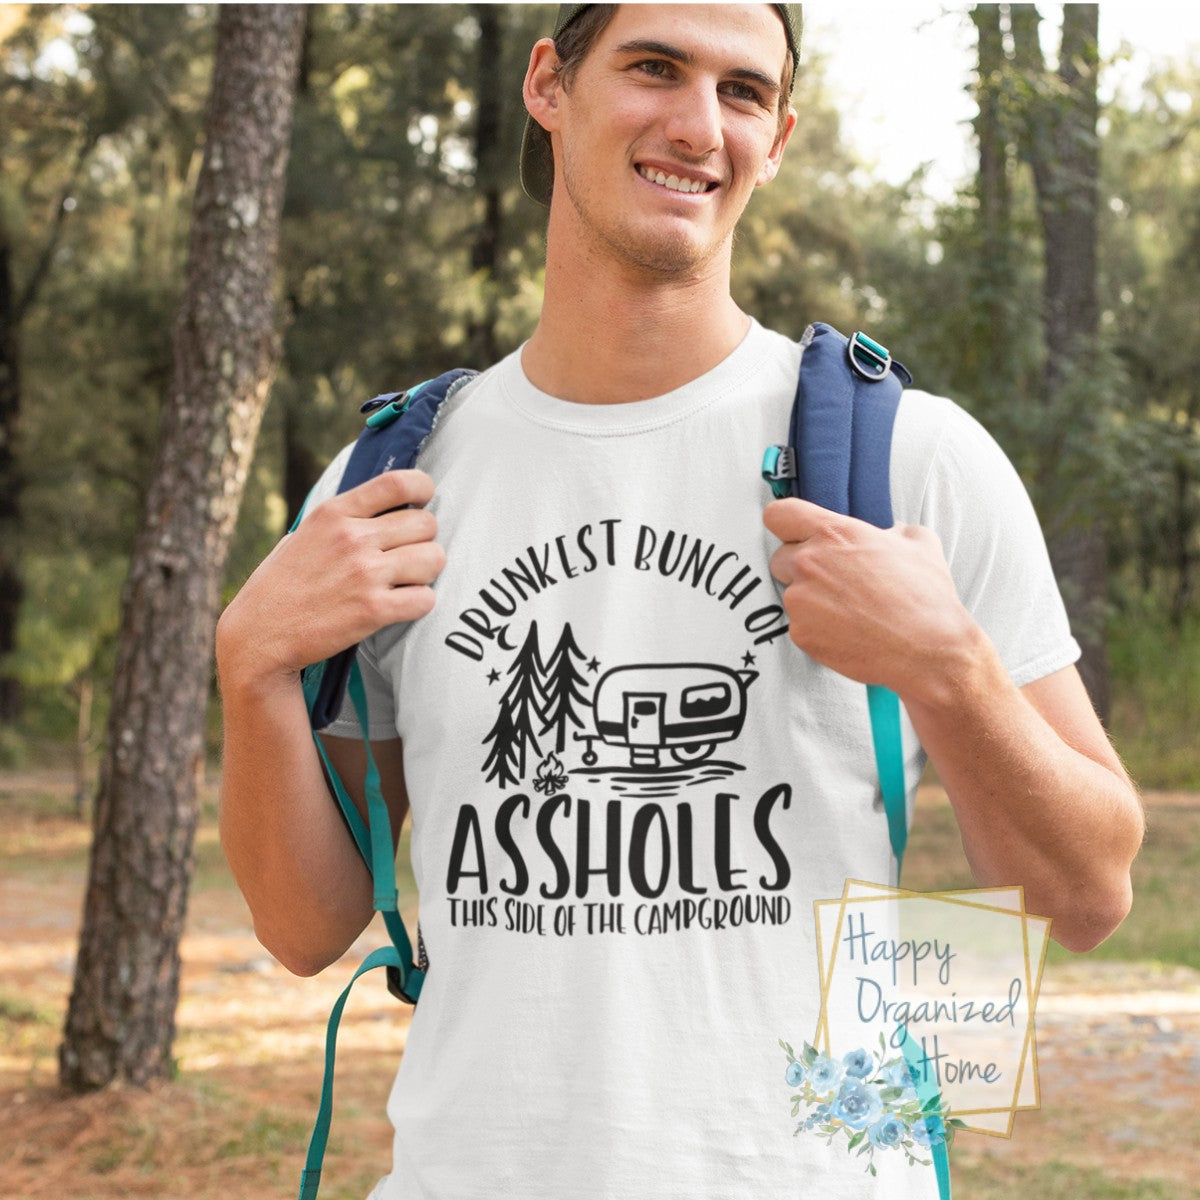 Drunkest Bunch of Assholes his side of the campground - Men's cotton t-shirt